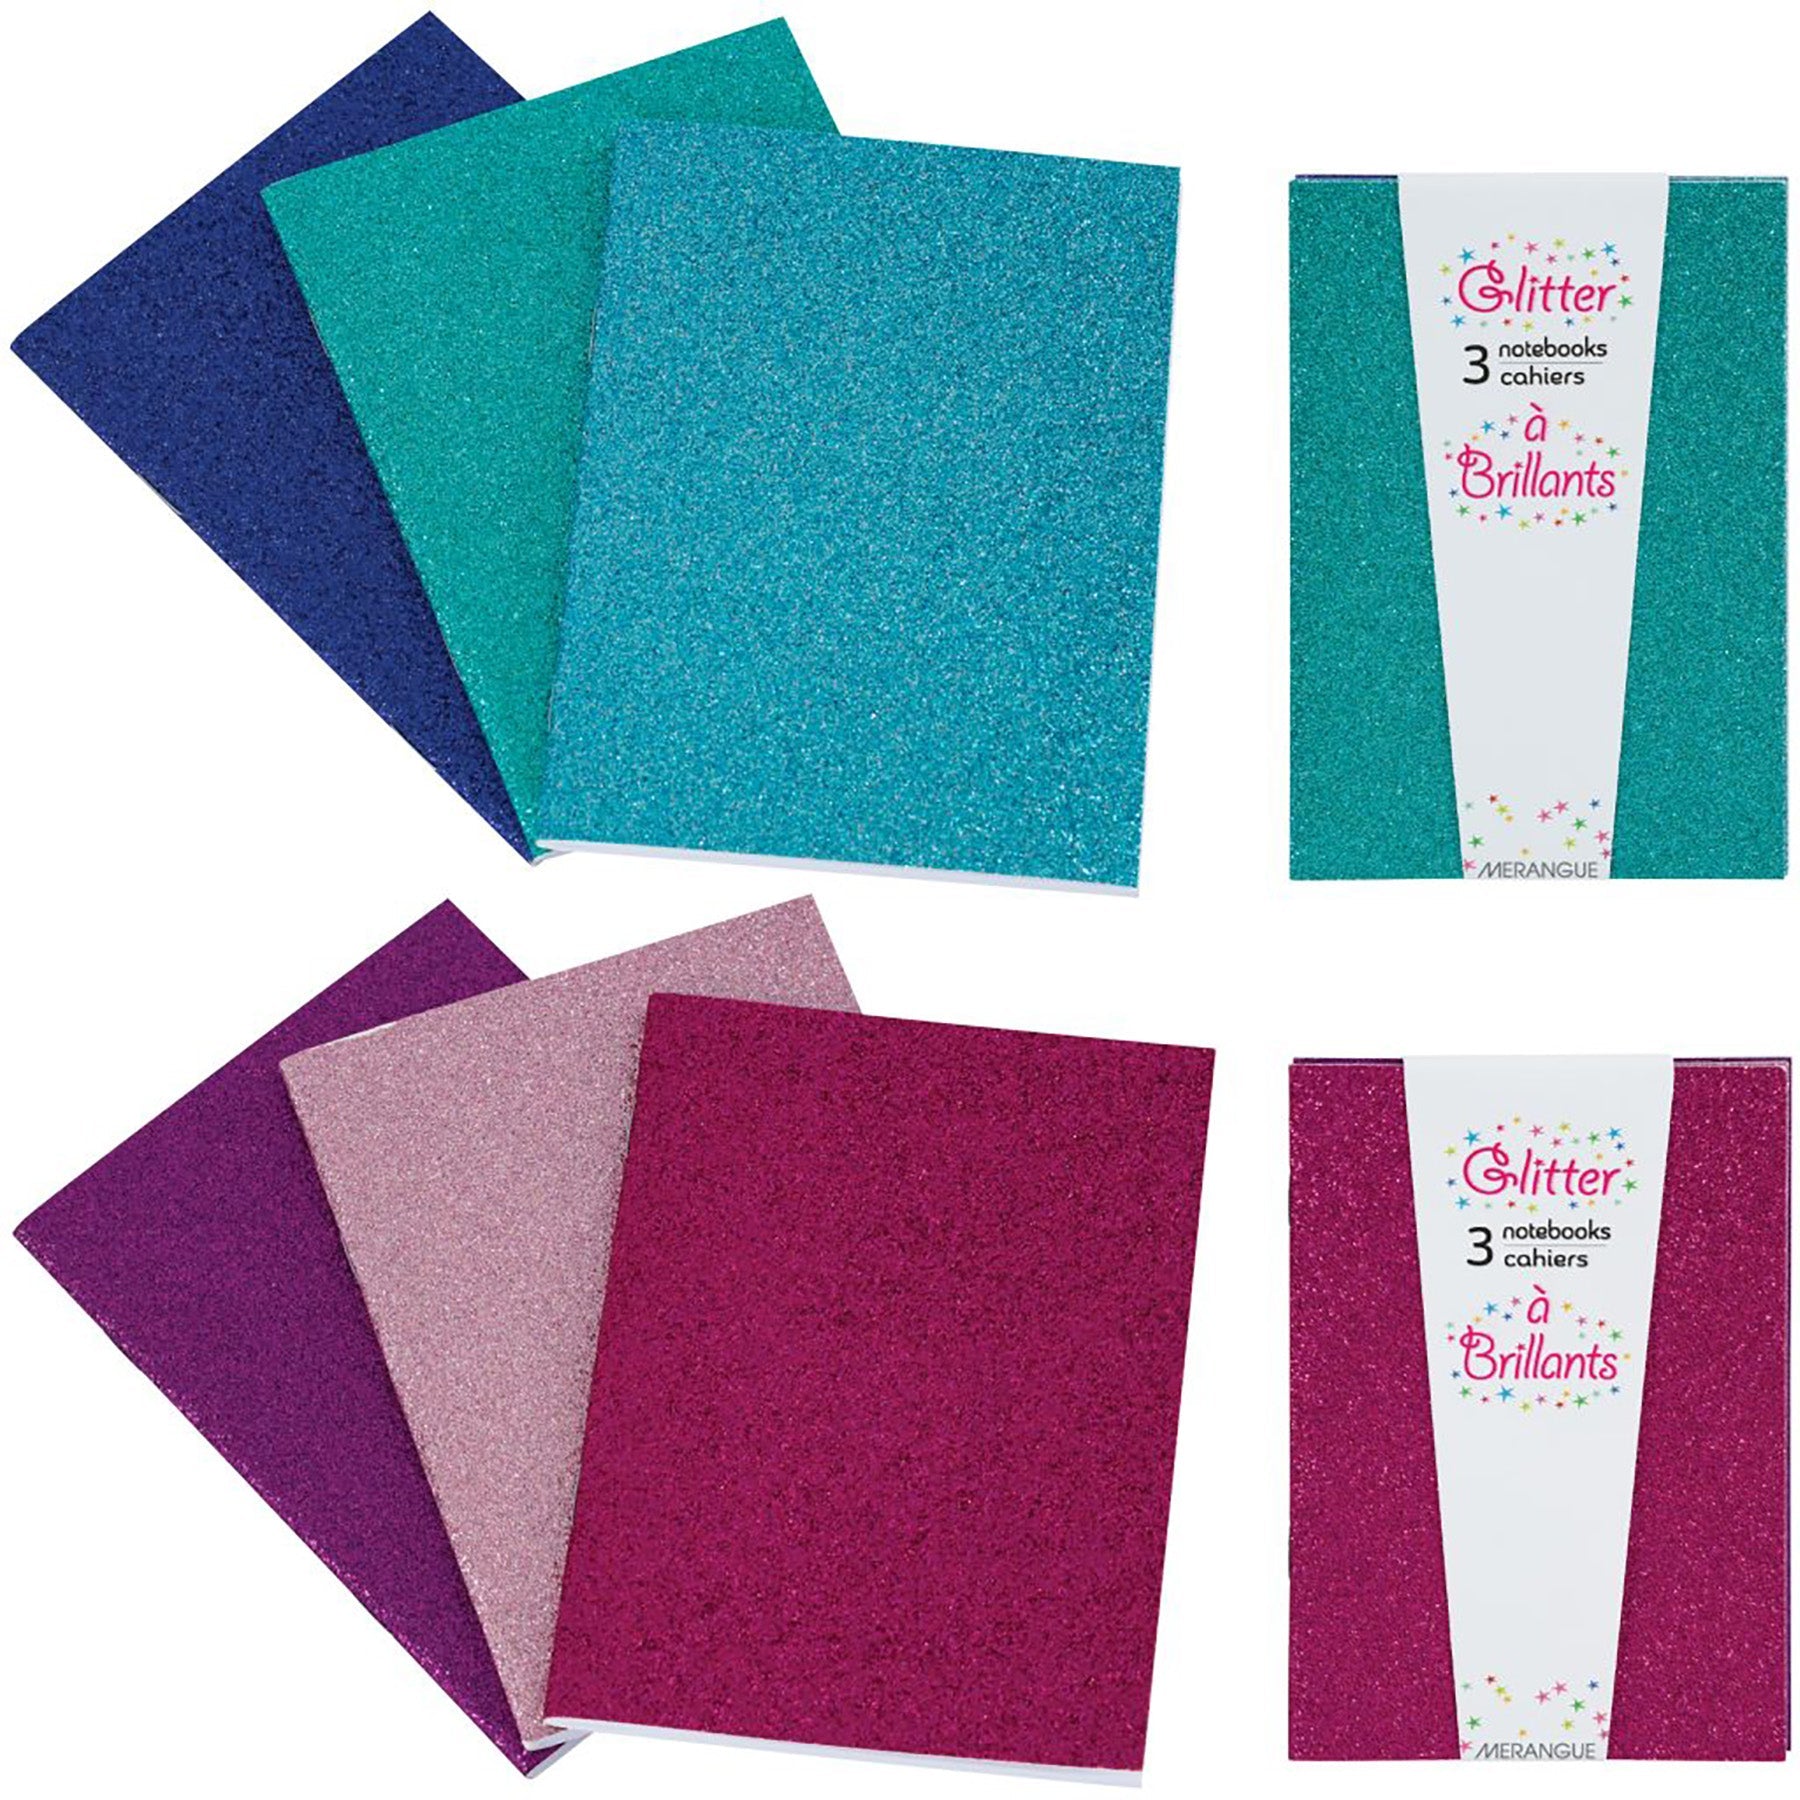 Merangue 3 Glitter Notebooks Lined 64 Pages 4x5.75in